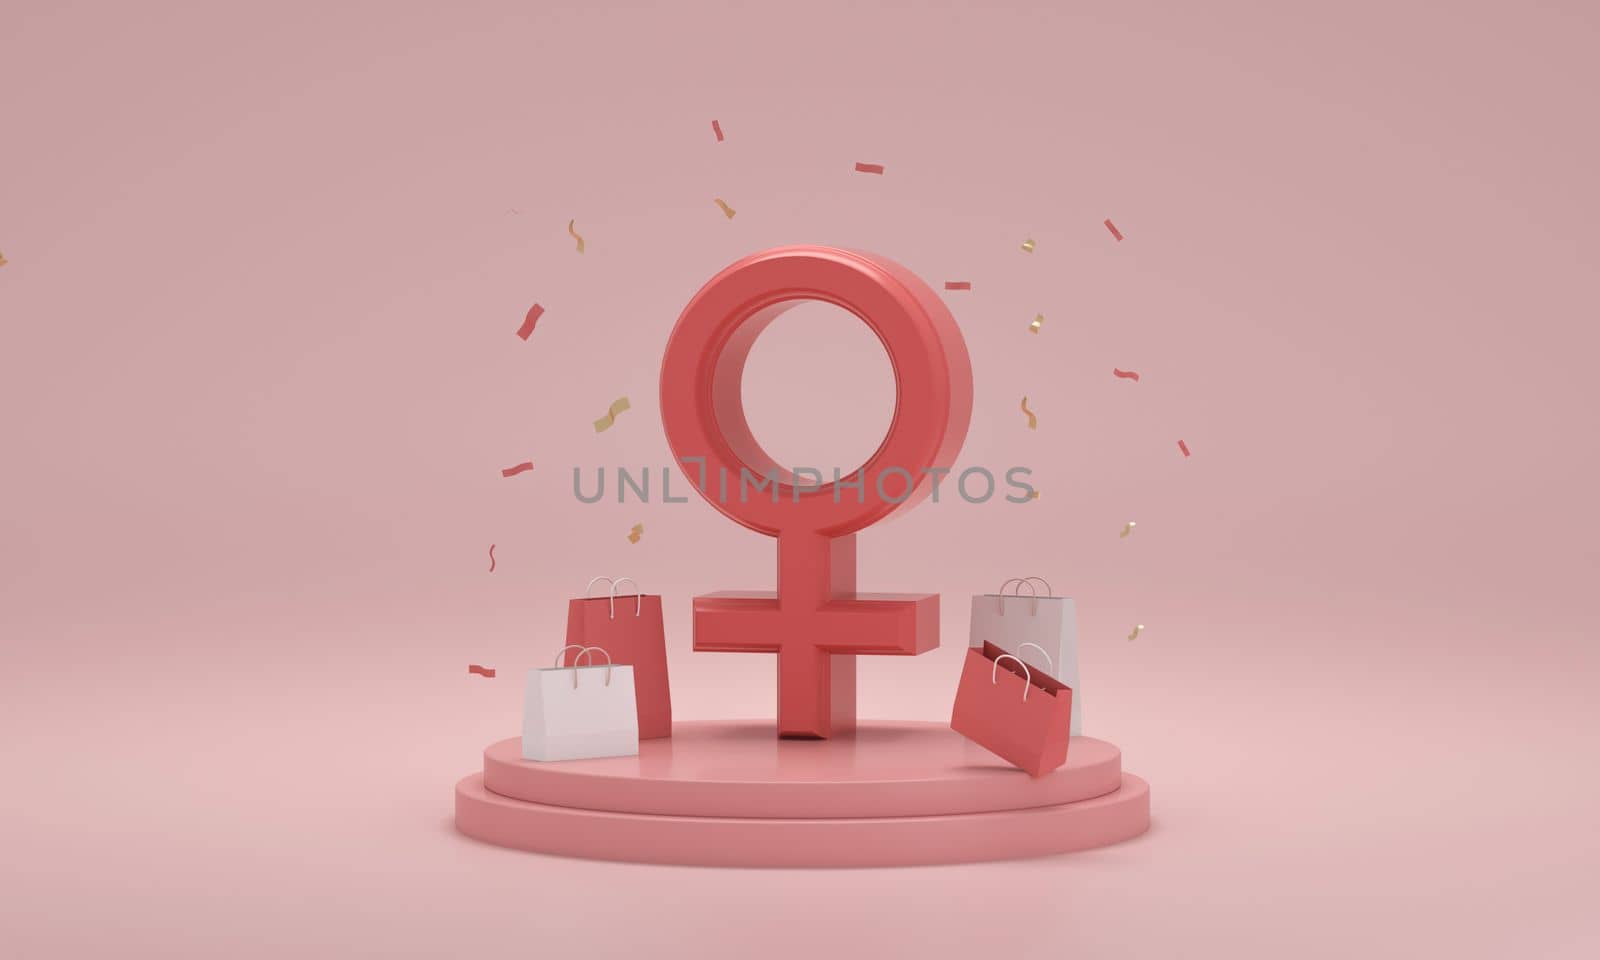 Female gender symbols and gift box on podium on pink background. Concept of International Women's Day. 3D rendering.